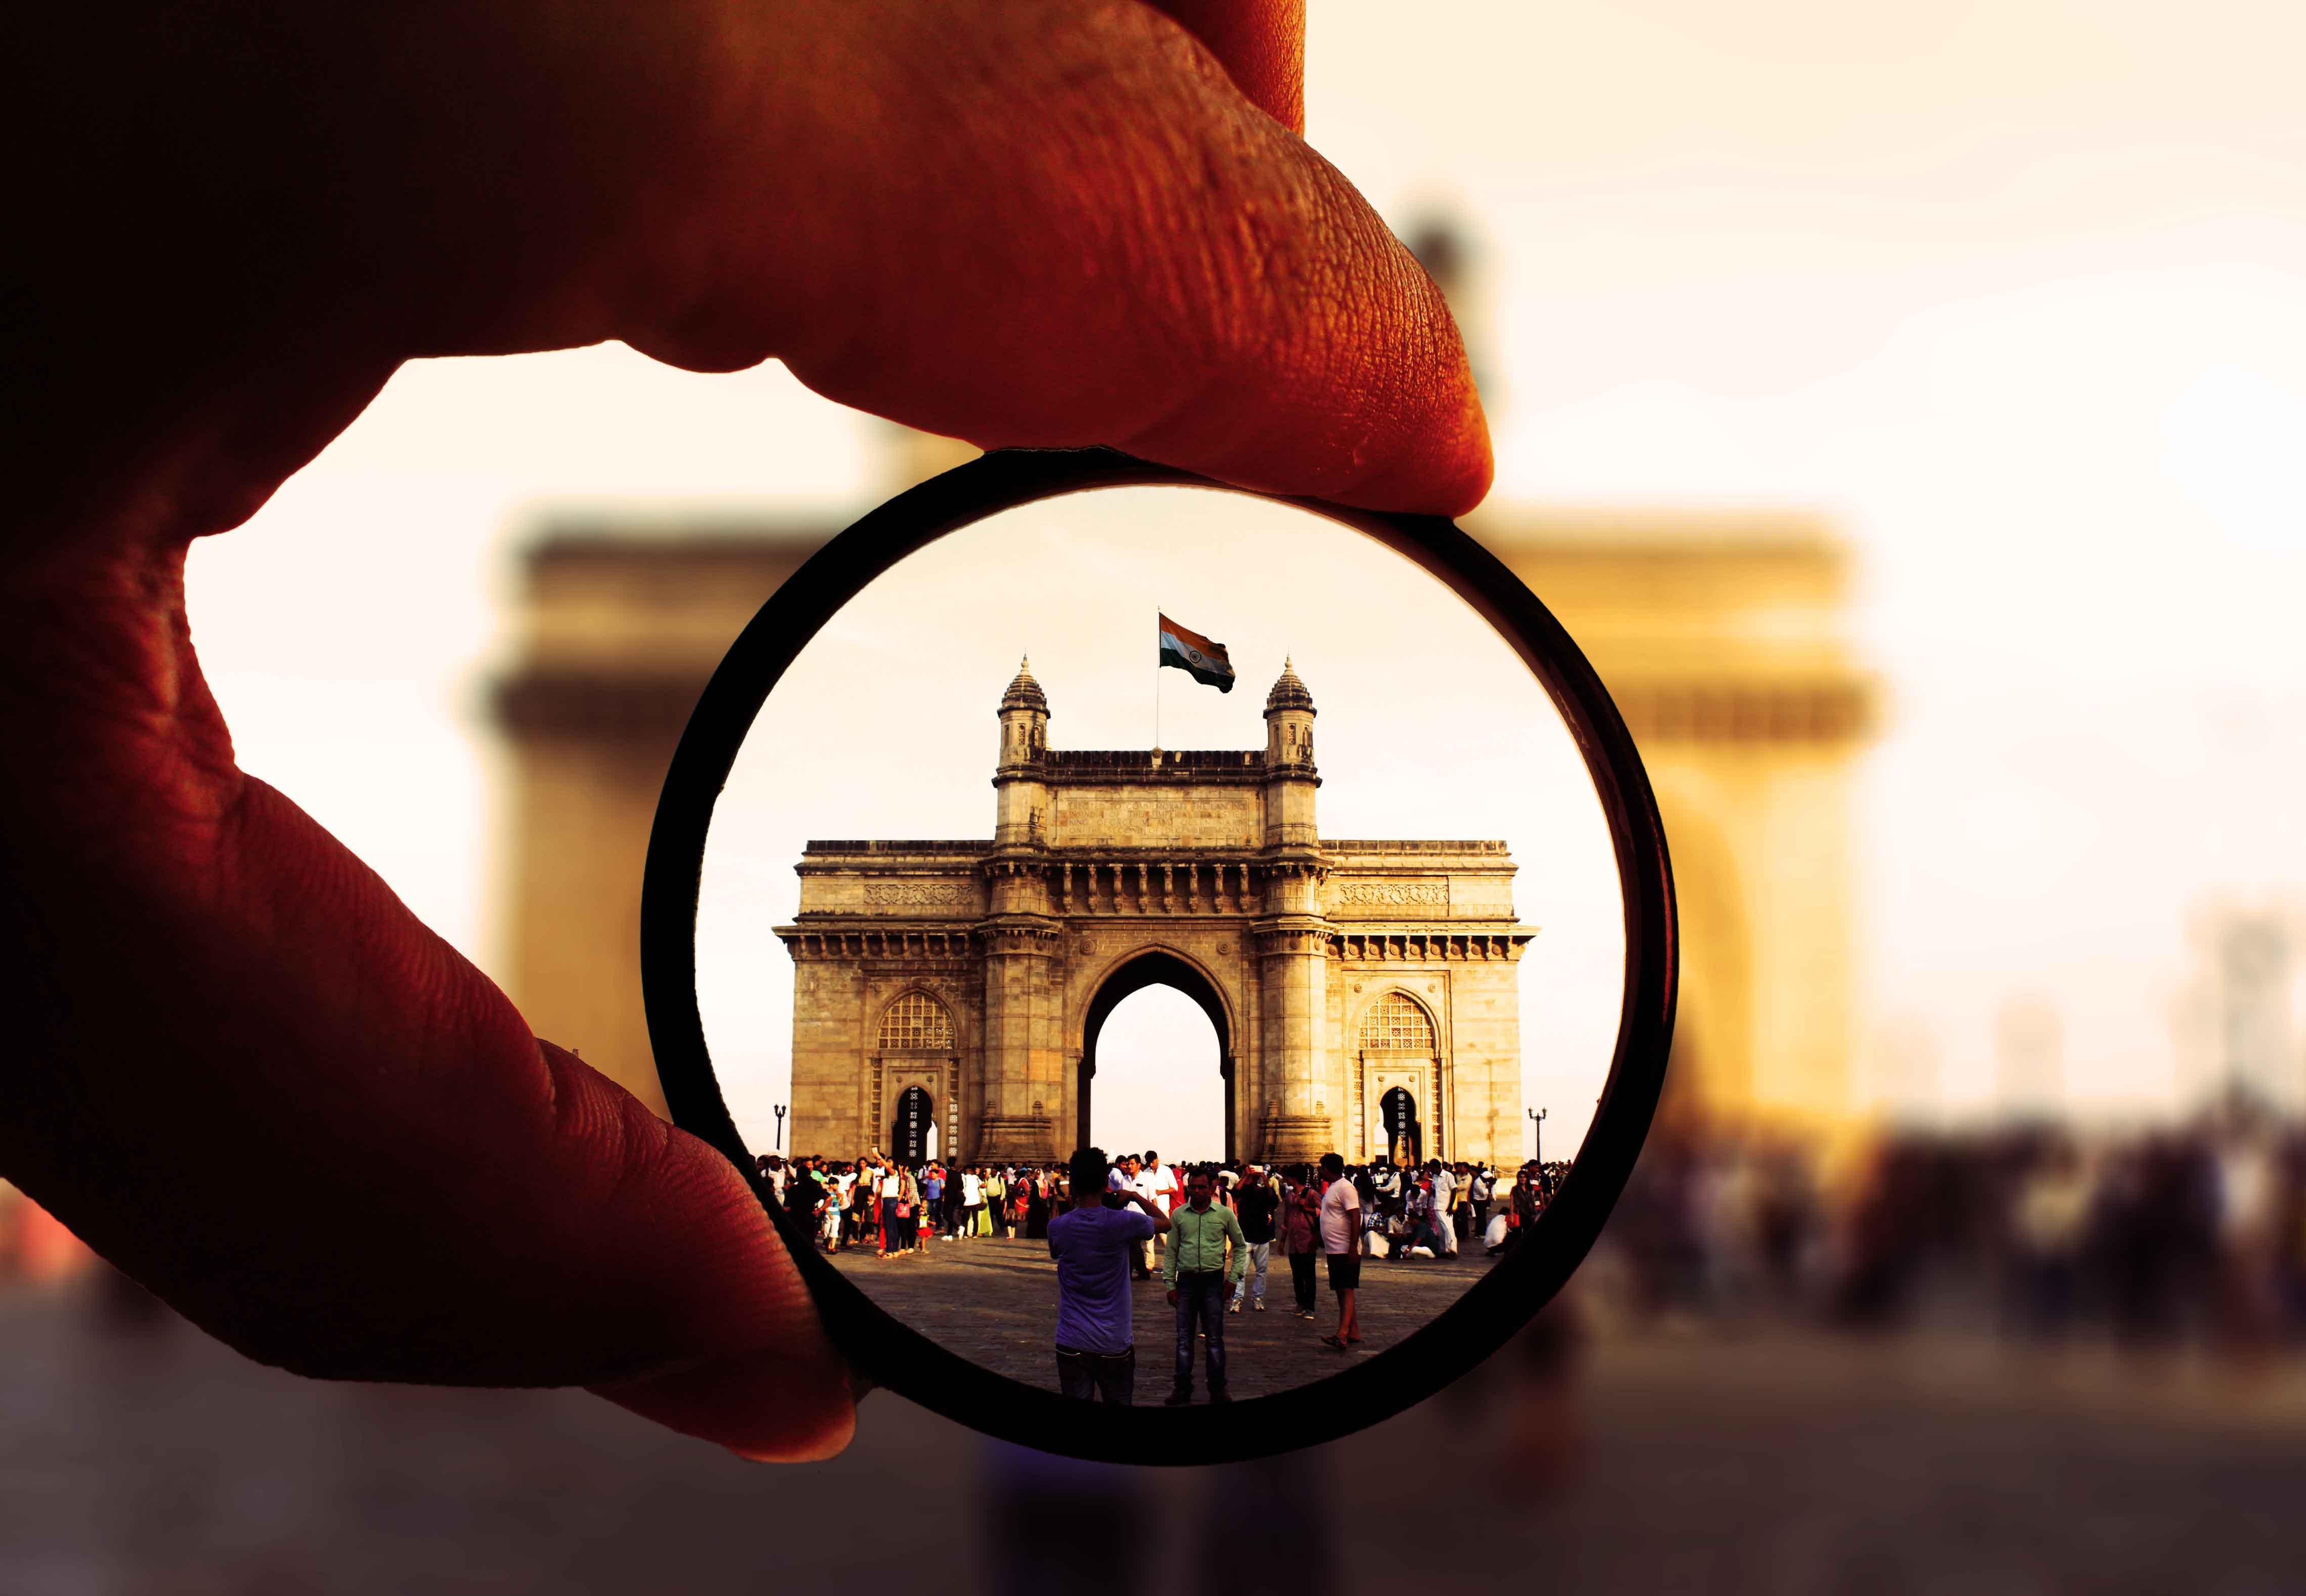 India photos download the best free india stock photos hd images